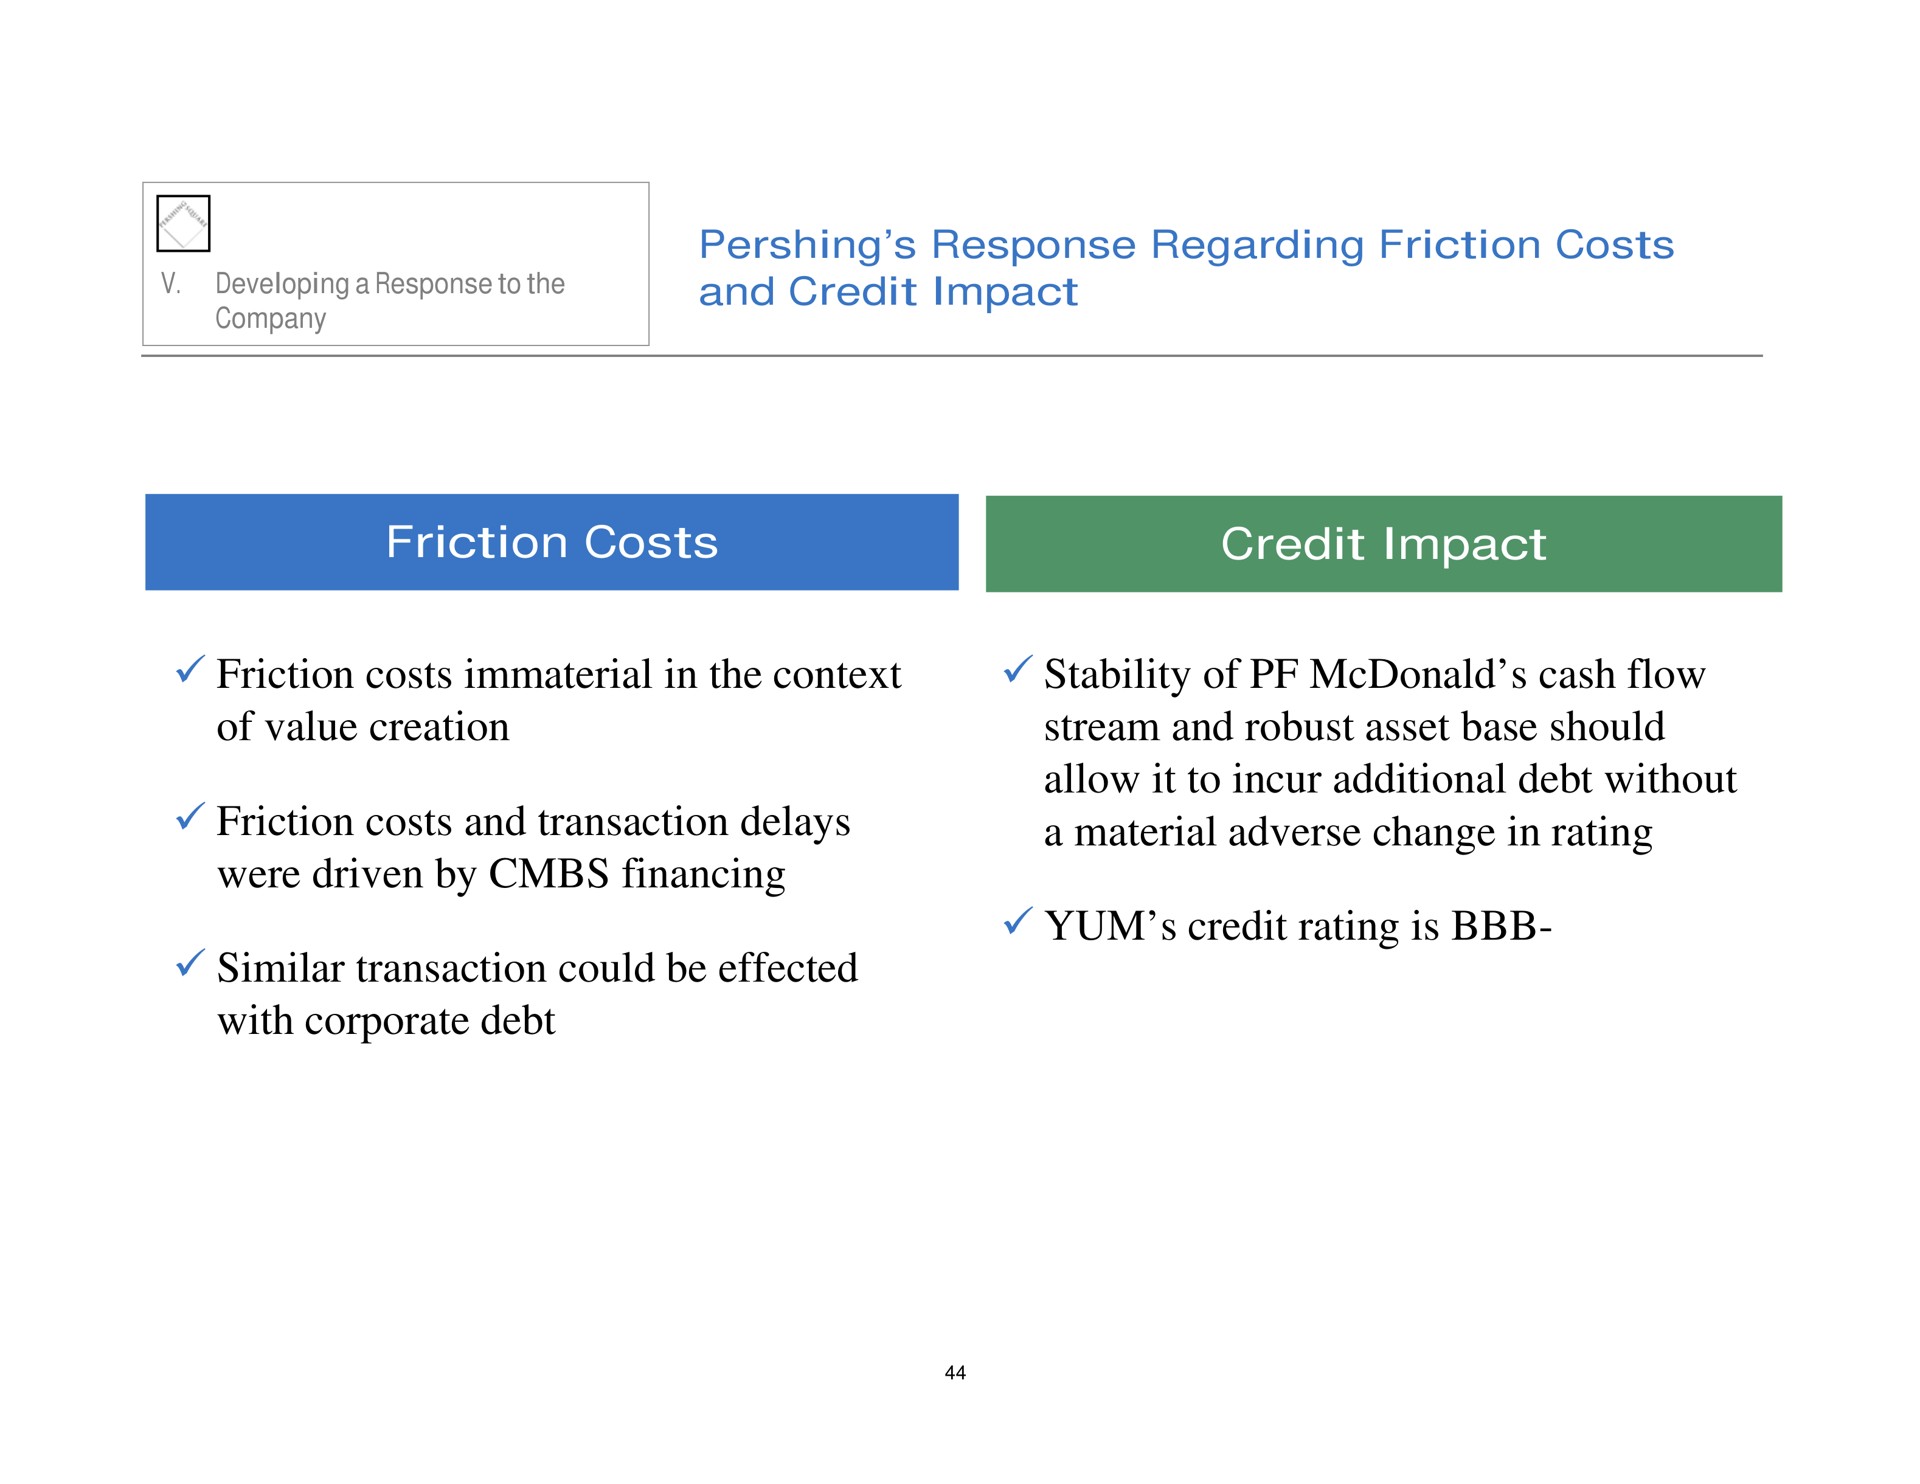 response regarding friction costs and credit impact friction costs credit impact friction costs immaterial in the context of value creation friction costs and transaction delays were driven by financing similar transaction could be effected with corporate debt stability of cash flow stream and robust asset base should allow it to incur additional debt without a material adverse change in rating credit rating is | Pershing Square